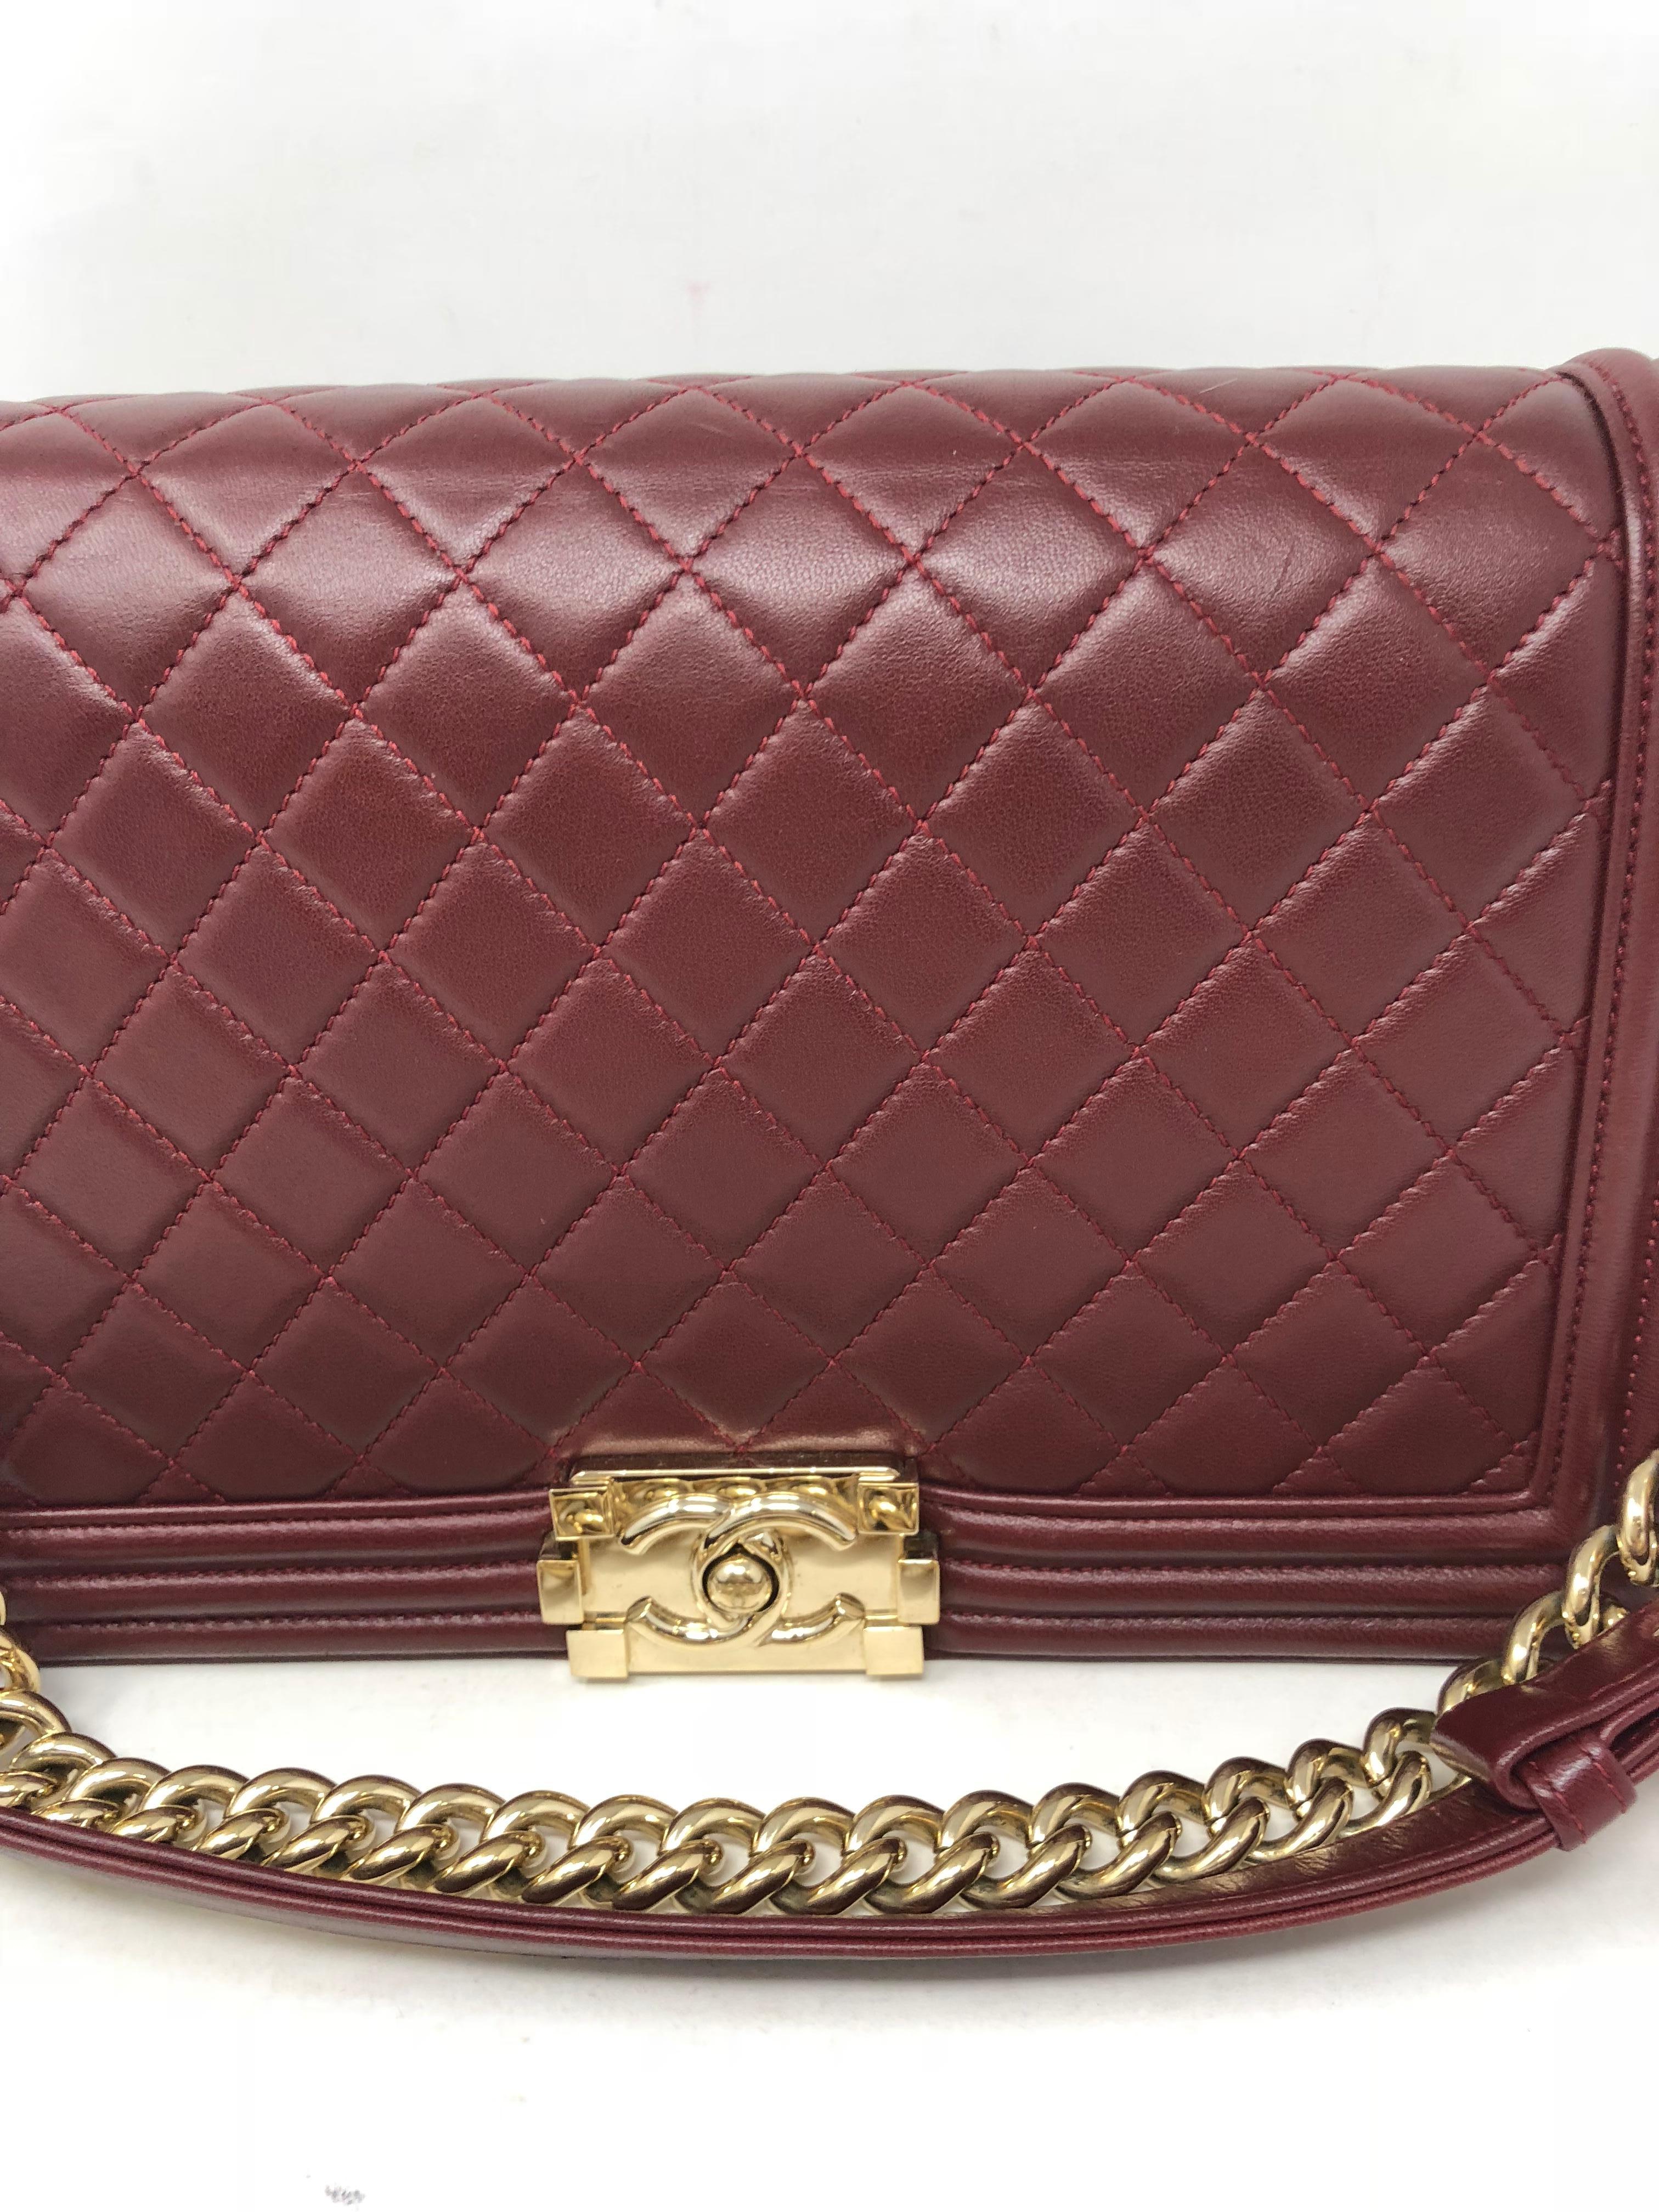 Chanel Burgundy Boy Bag with gold hardware. Great condition bag. Hardware and chain like new still very shiny gold. Larger medium size. Lambskin smooth leather in good condition. Bag can be worn as a crossbody or shorter. Stunning and rare color.